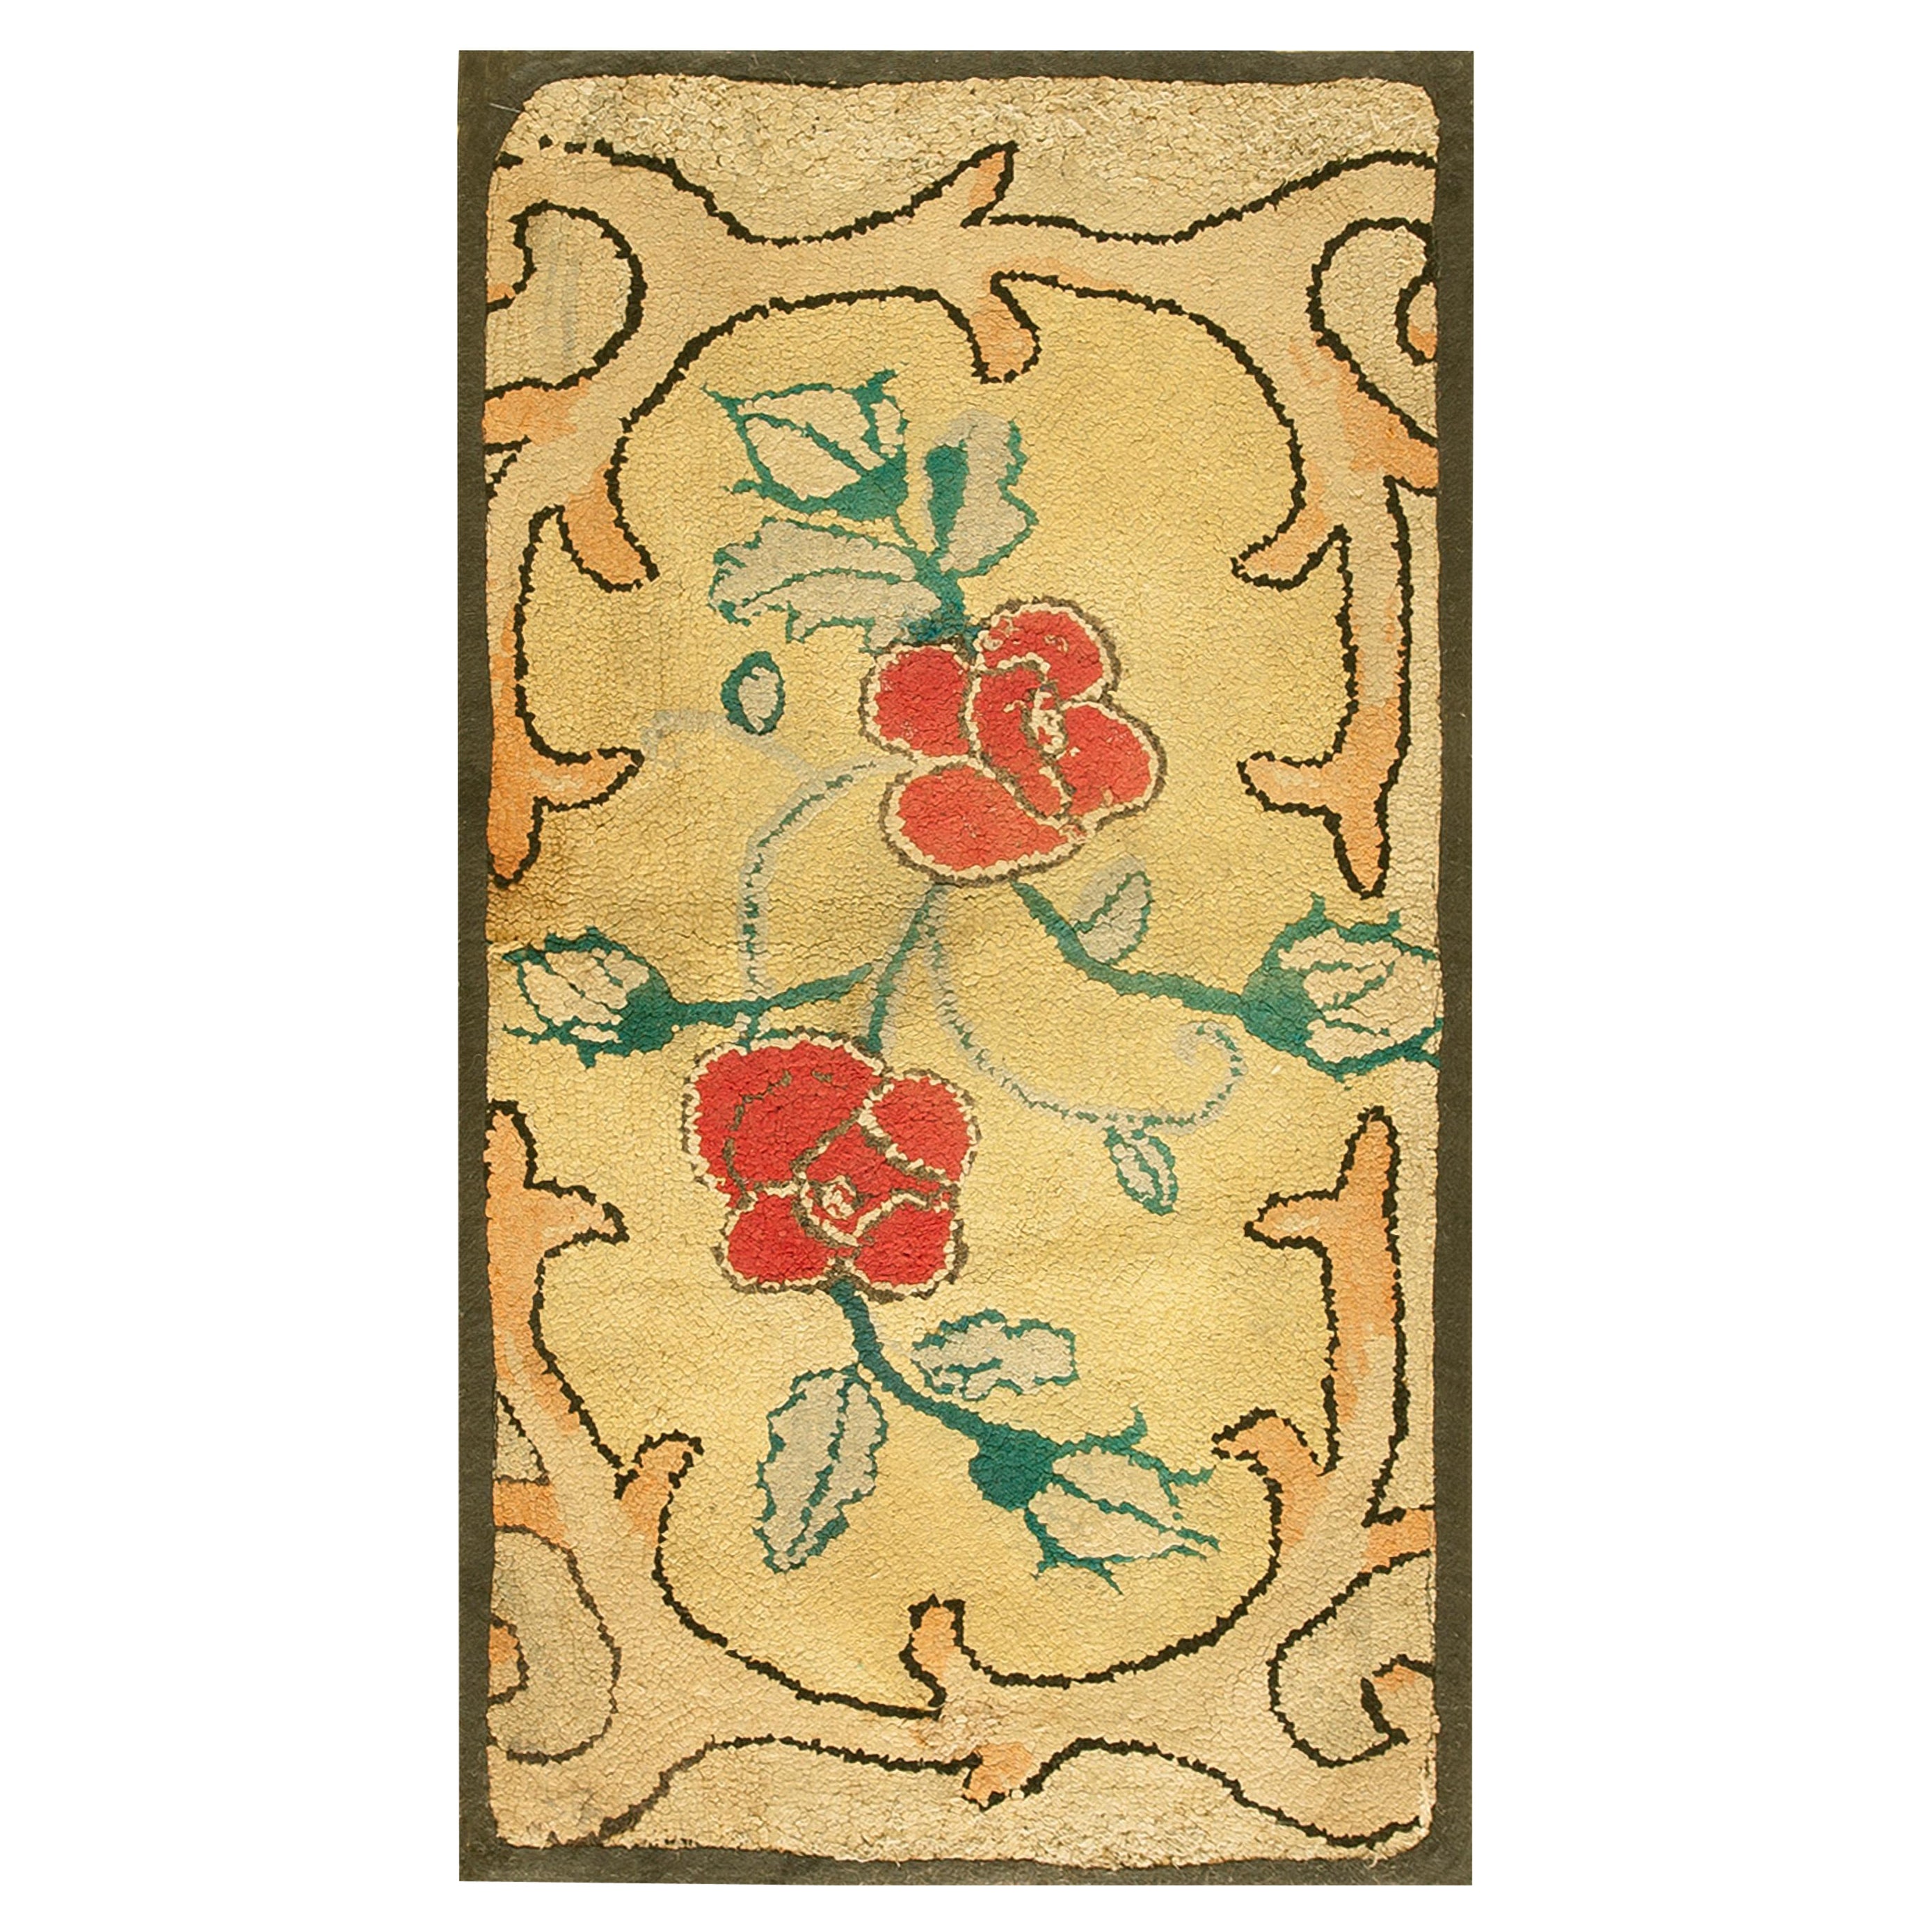 Early 20th Century  American Hooked Rug ( 1'7" x 3' - 48 x 91 cm ) 